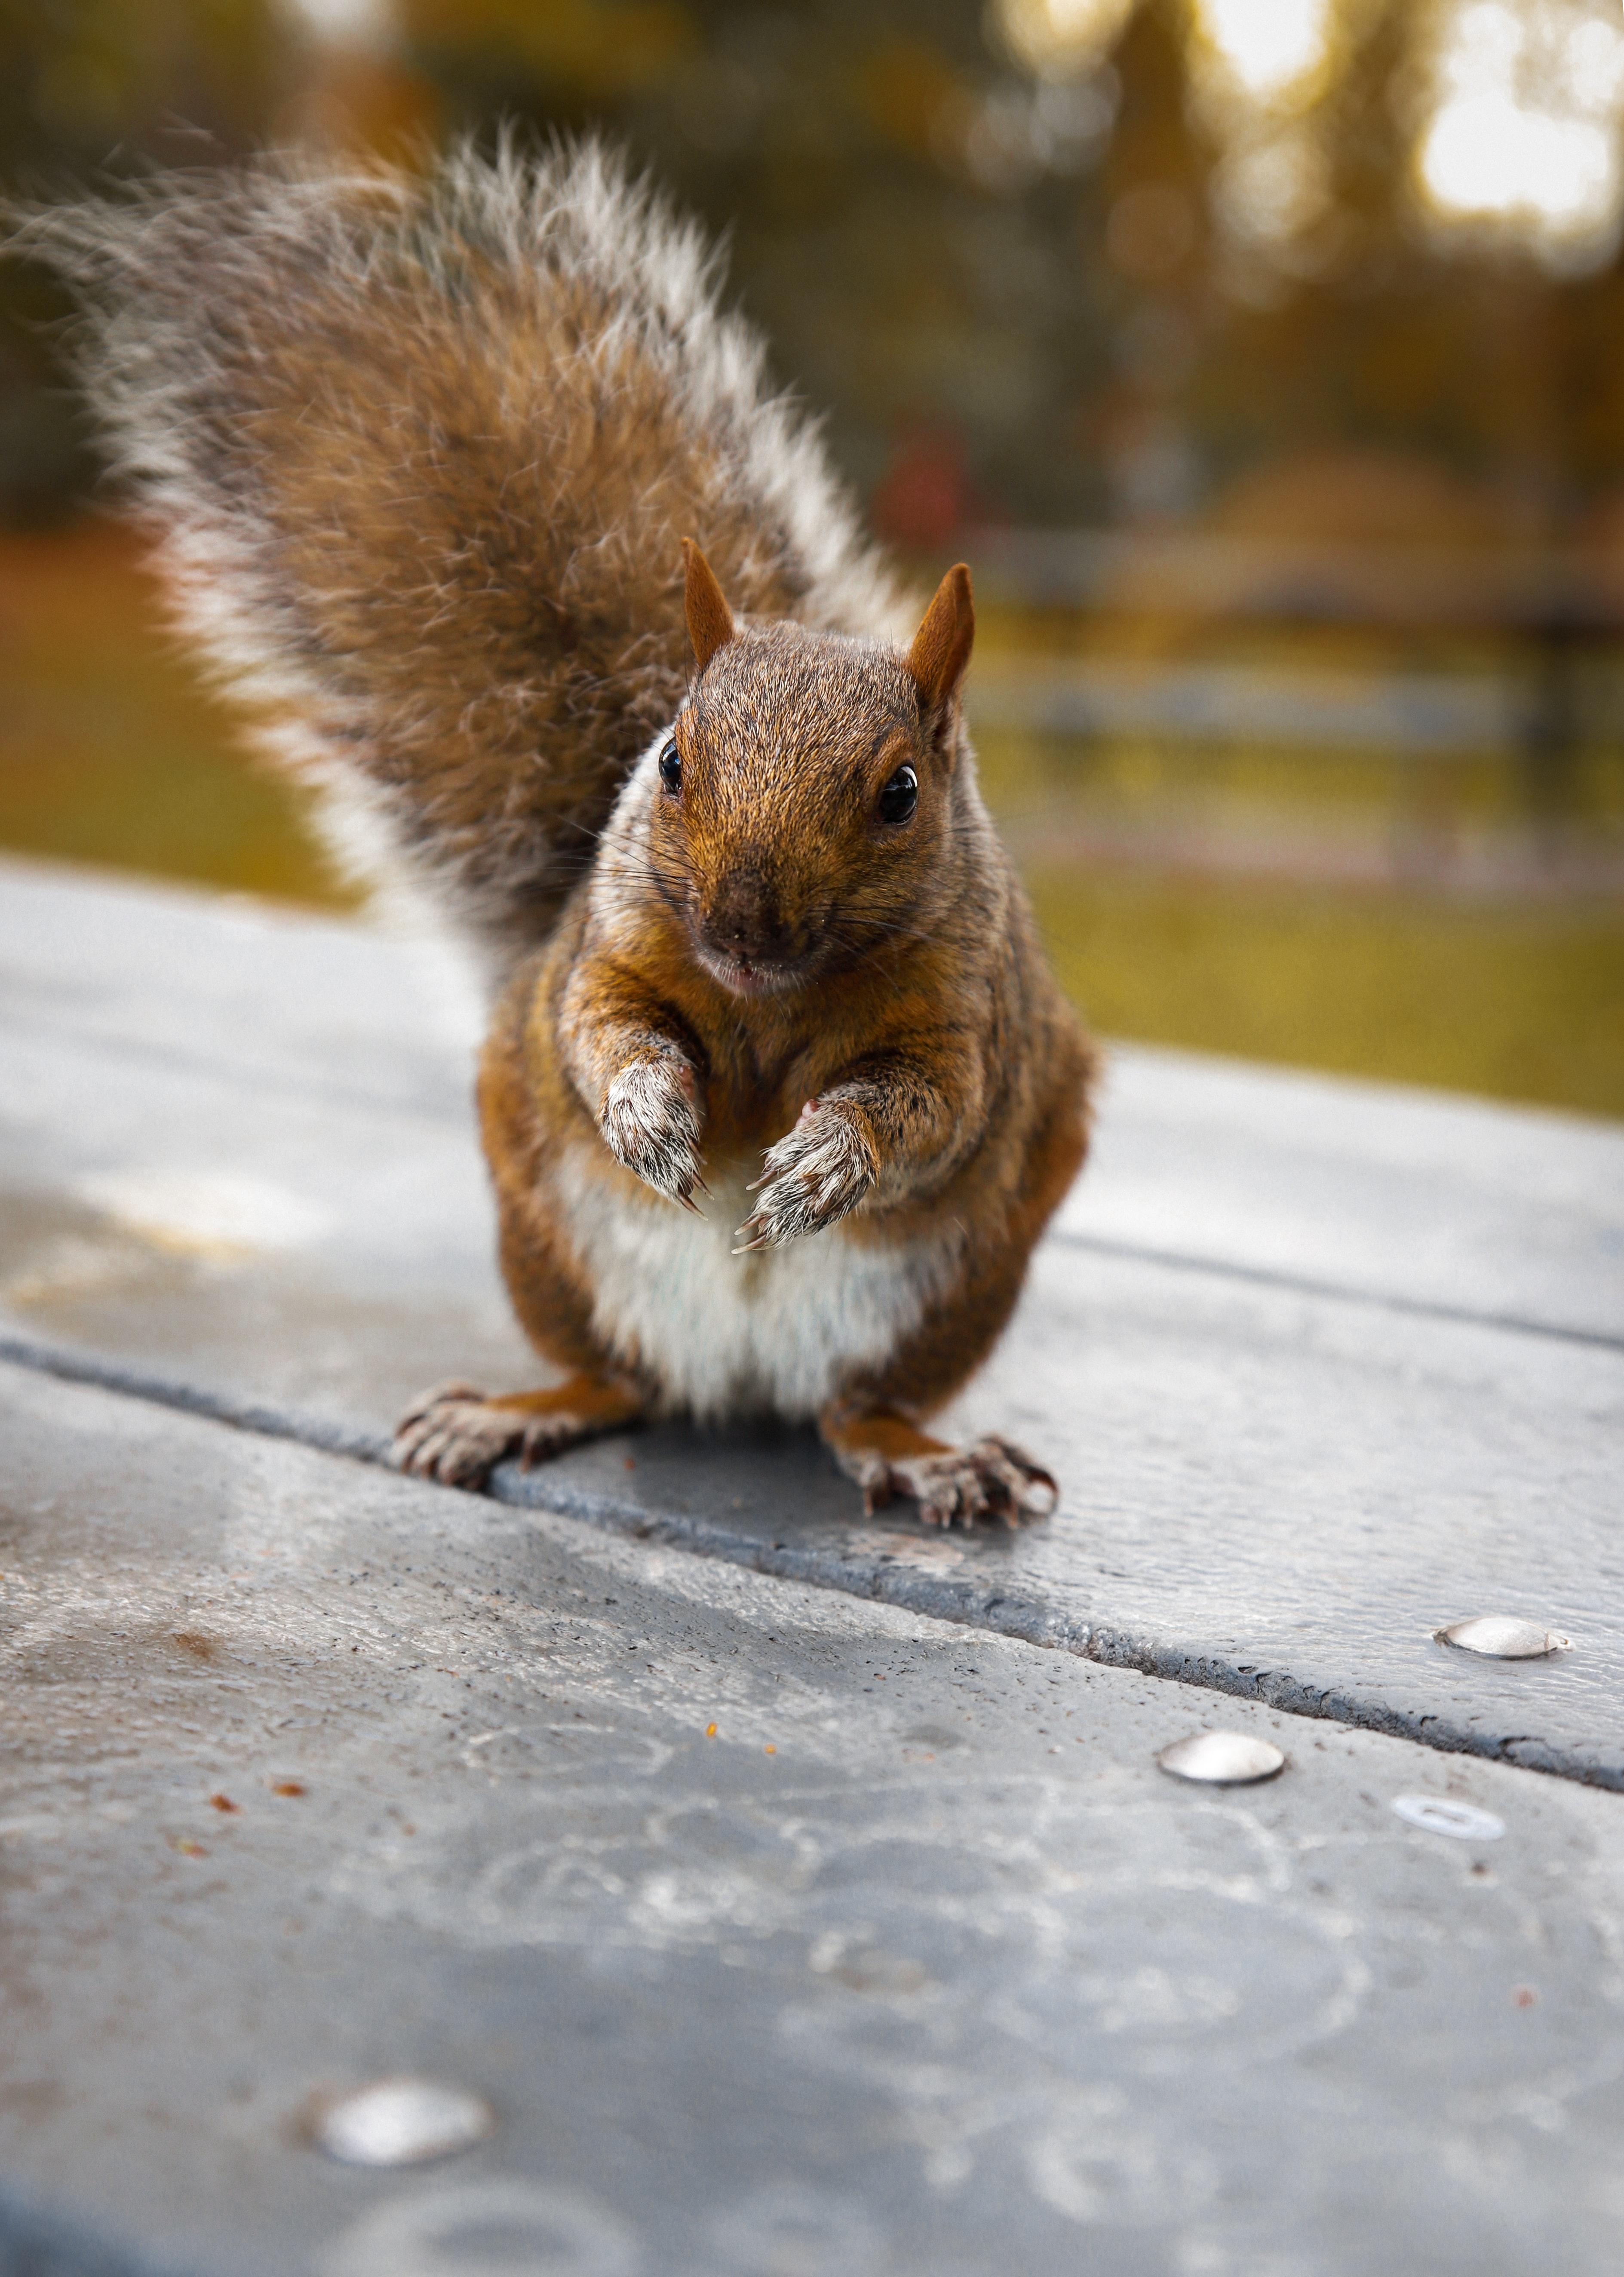 Cool Wallpapers funny, animals, squirrel, nice, sweetheart, rodent